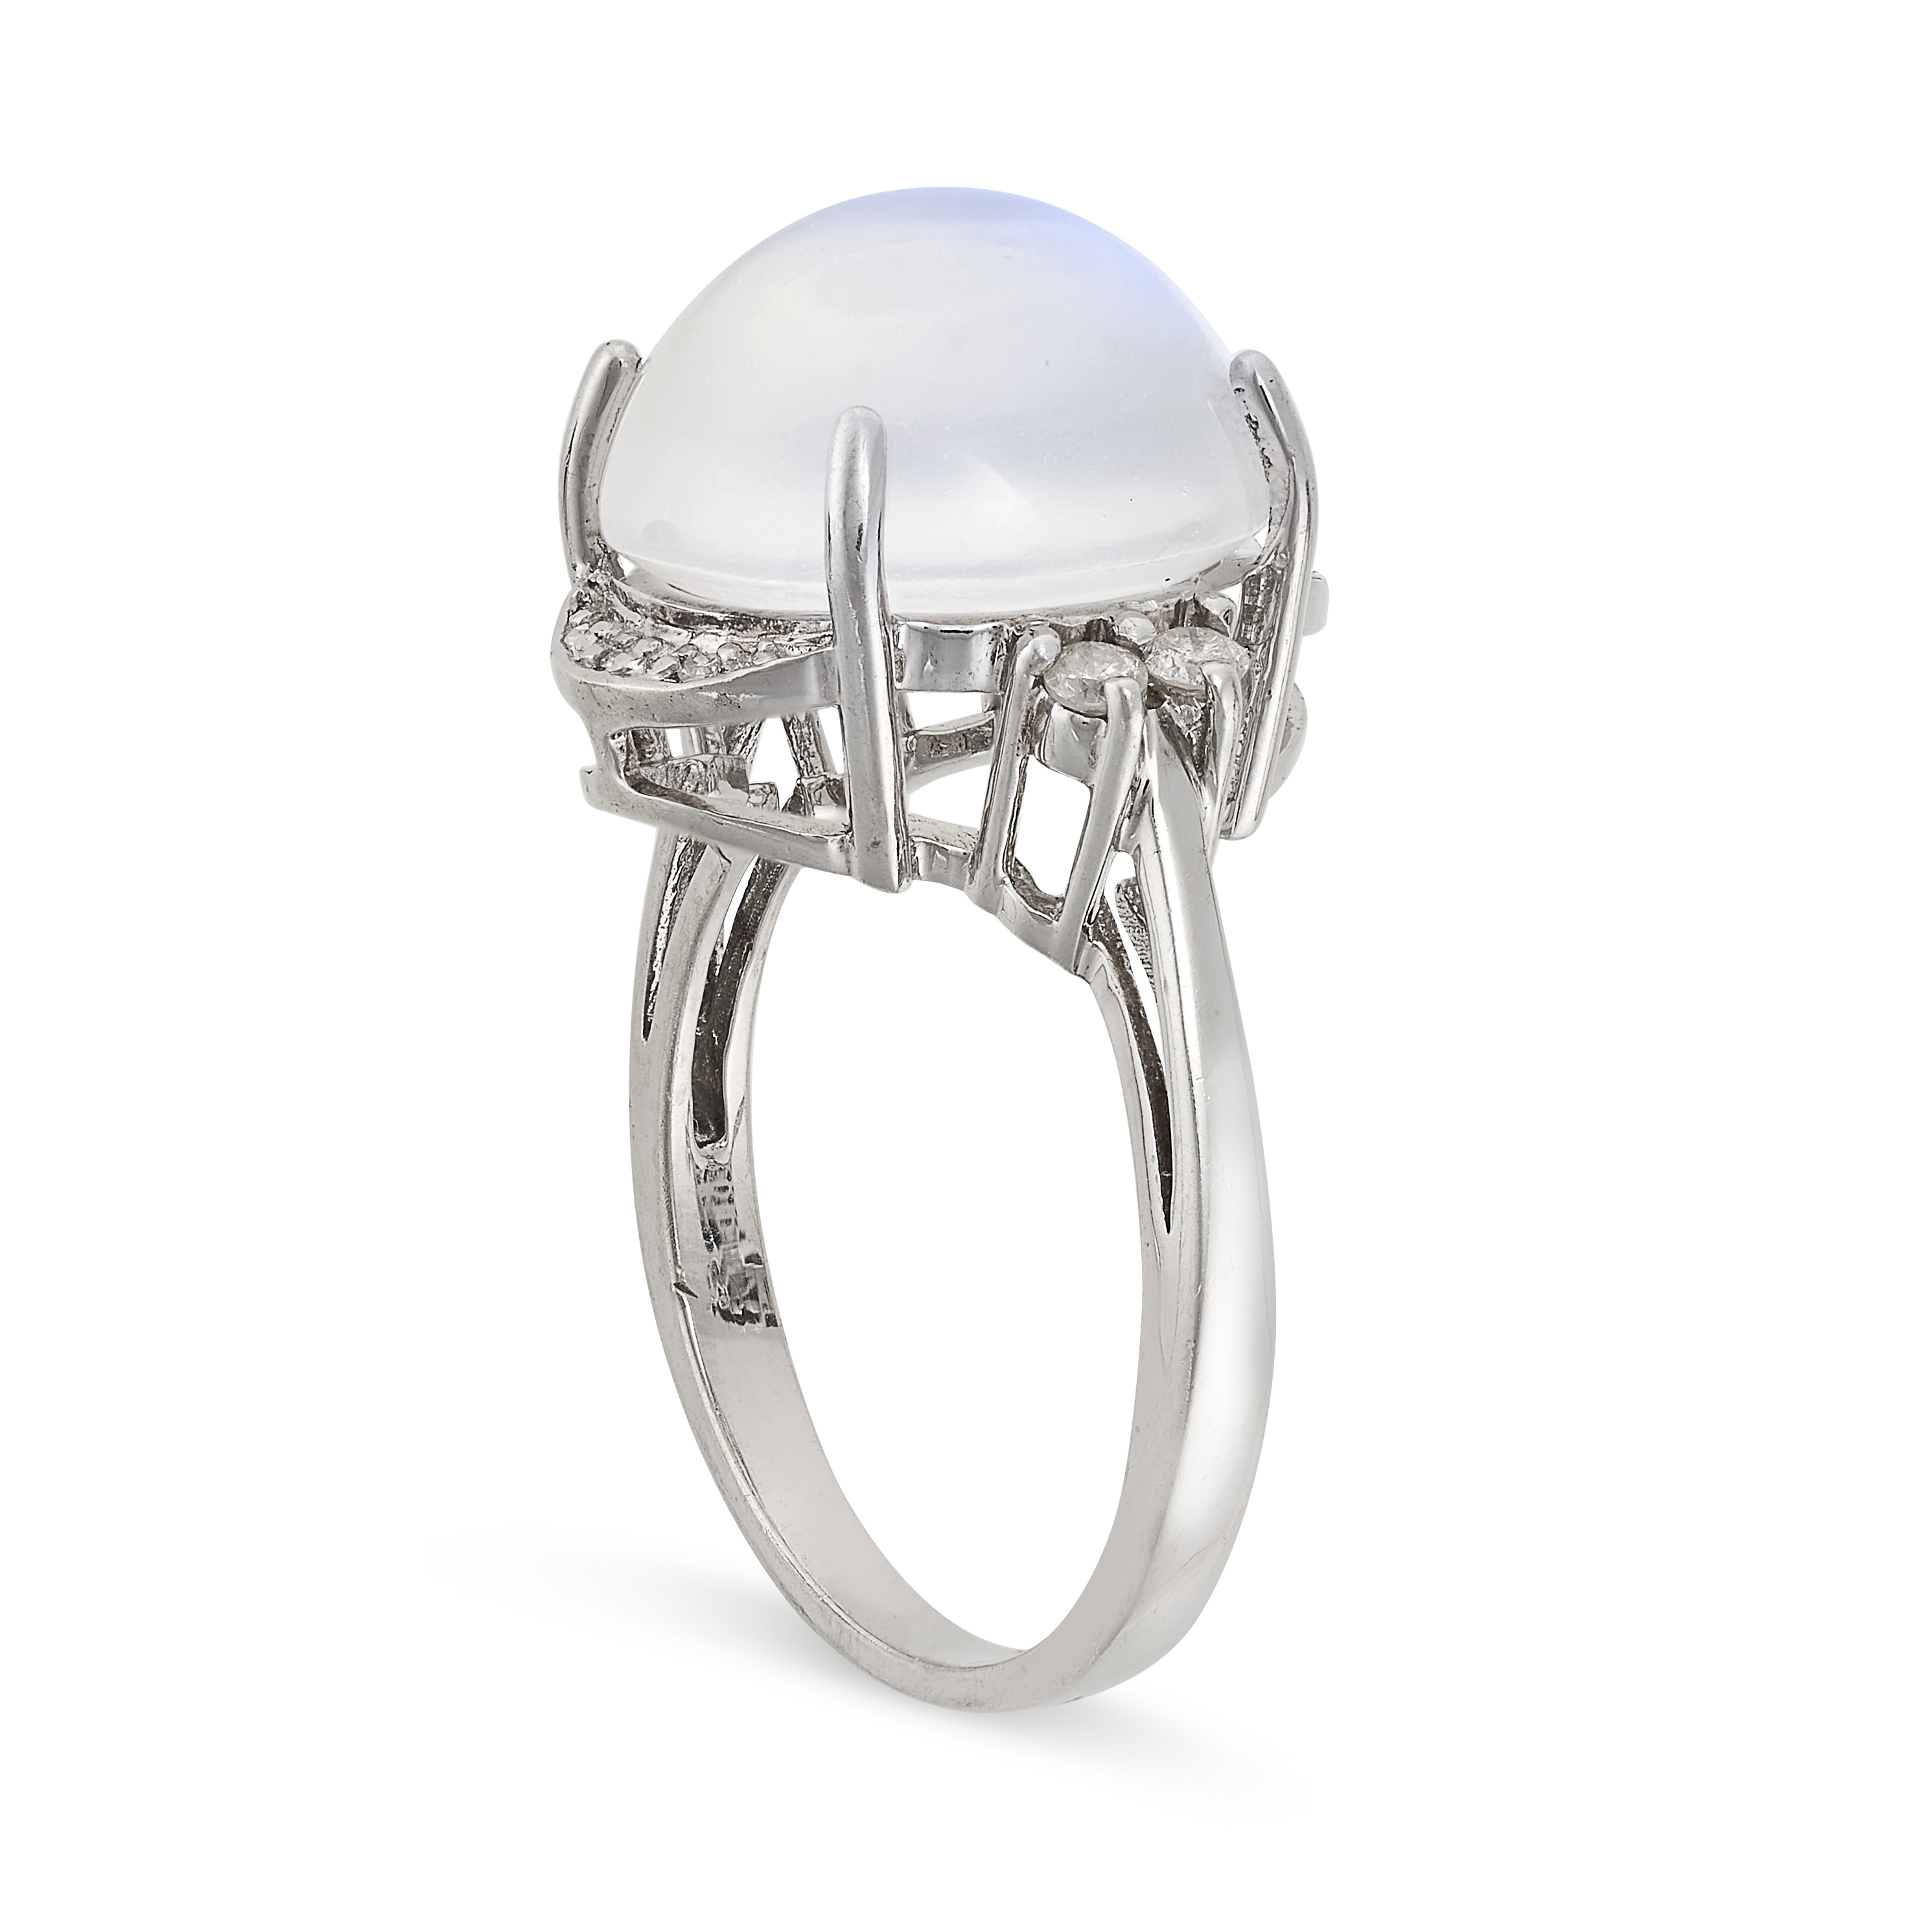 A MOONSTONE AND DIAMOND RING in 9ct white gold, set with a round cabochon star moonstone, accented - Image 2 of 2